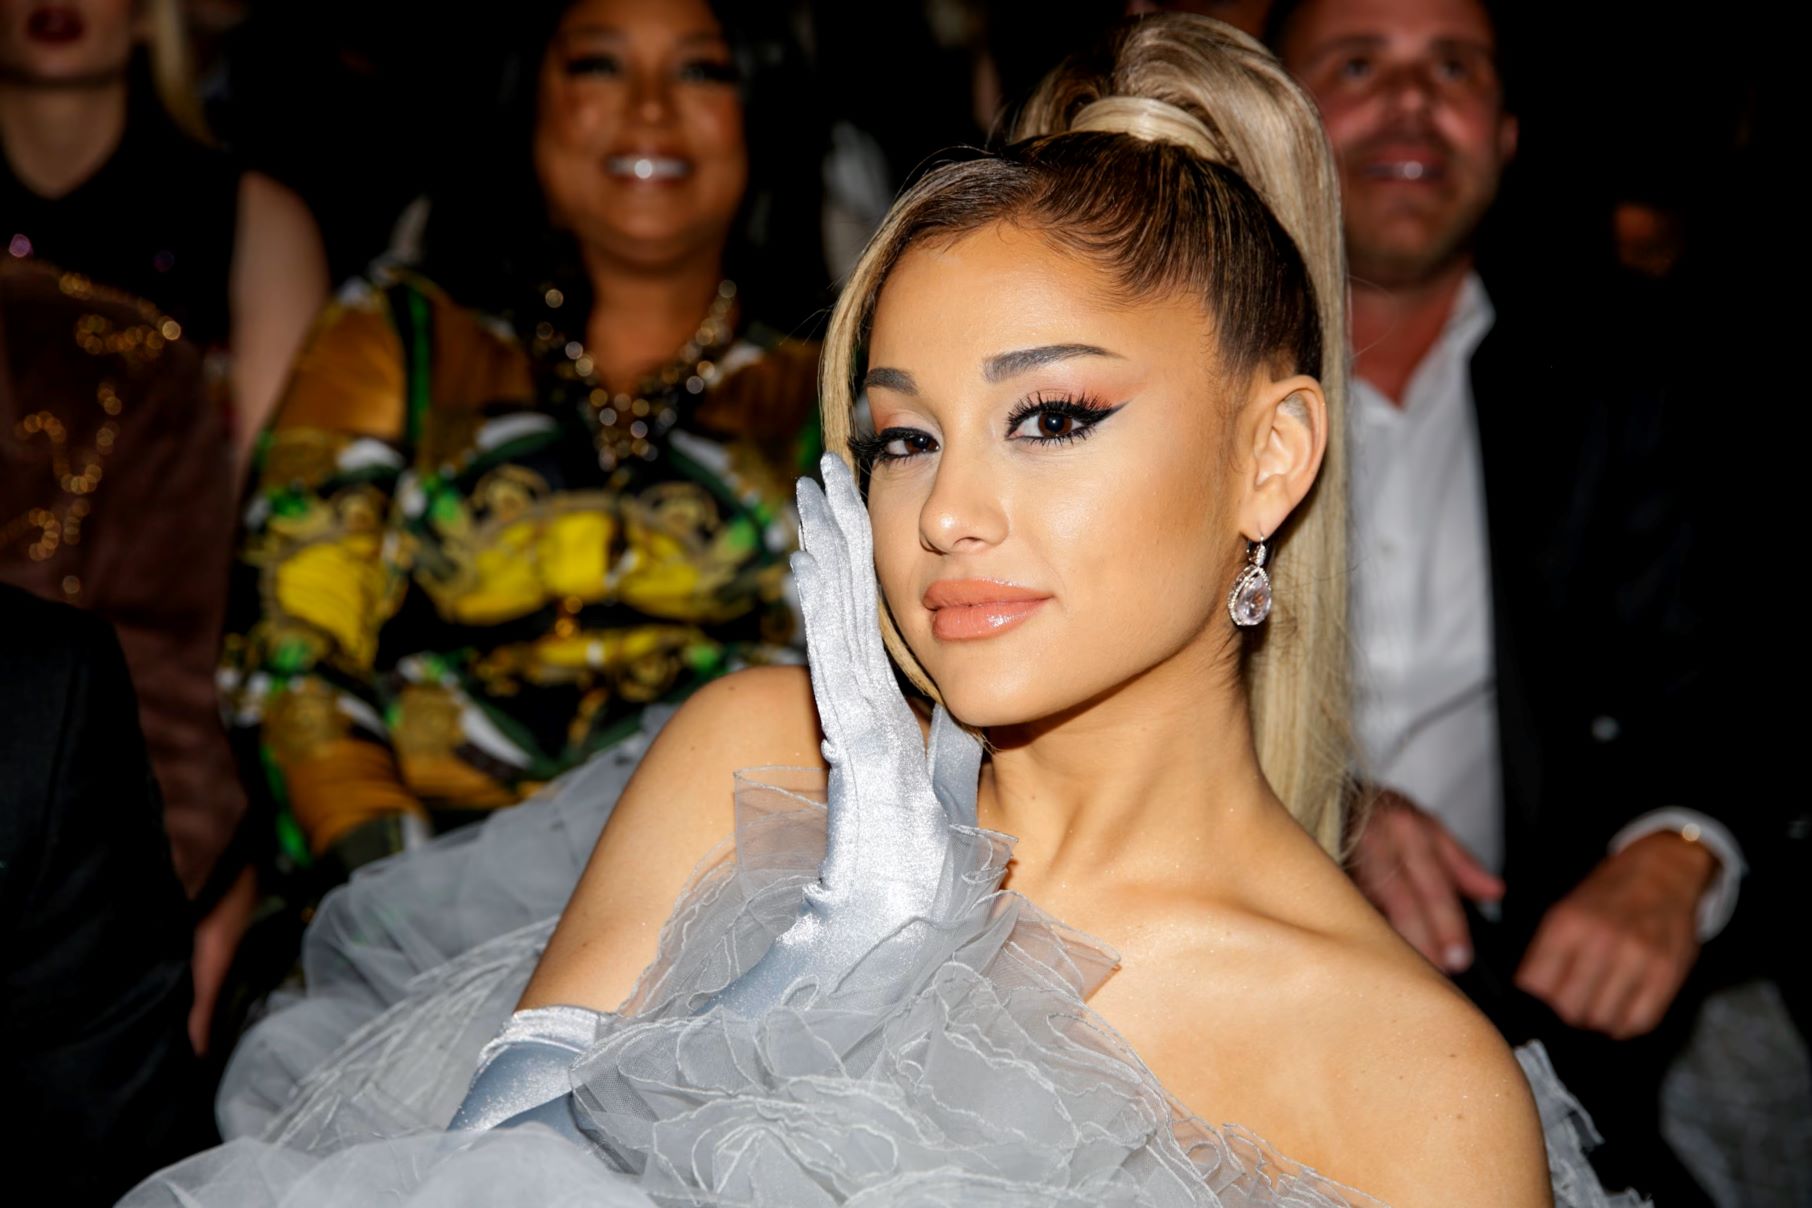 What Record Label Is Ariana Grande Signed To?